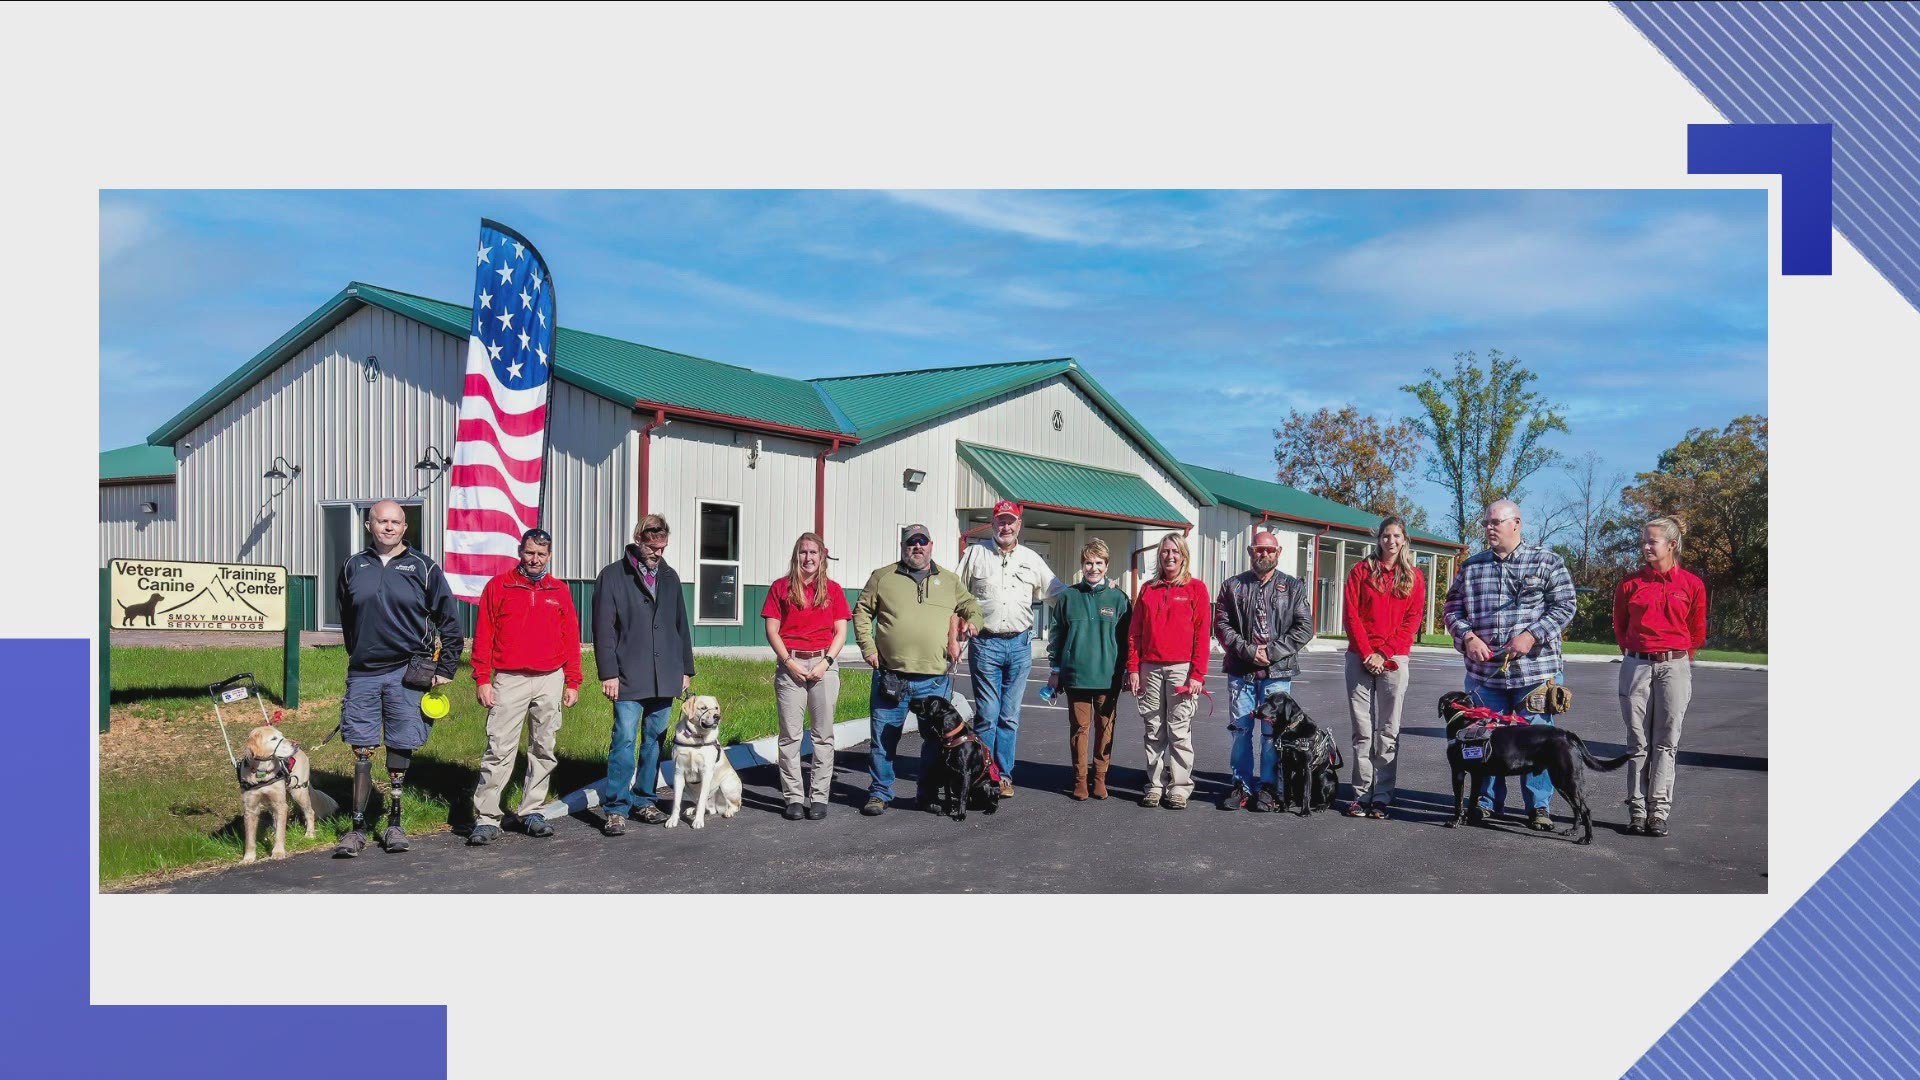 An East Tennessee nonprofit working to help wounded veterans cut the ribbon on a new training center in late 2020.